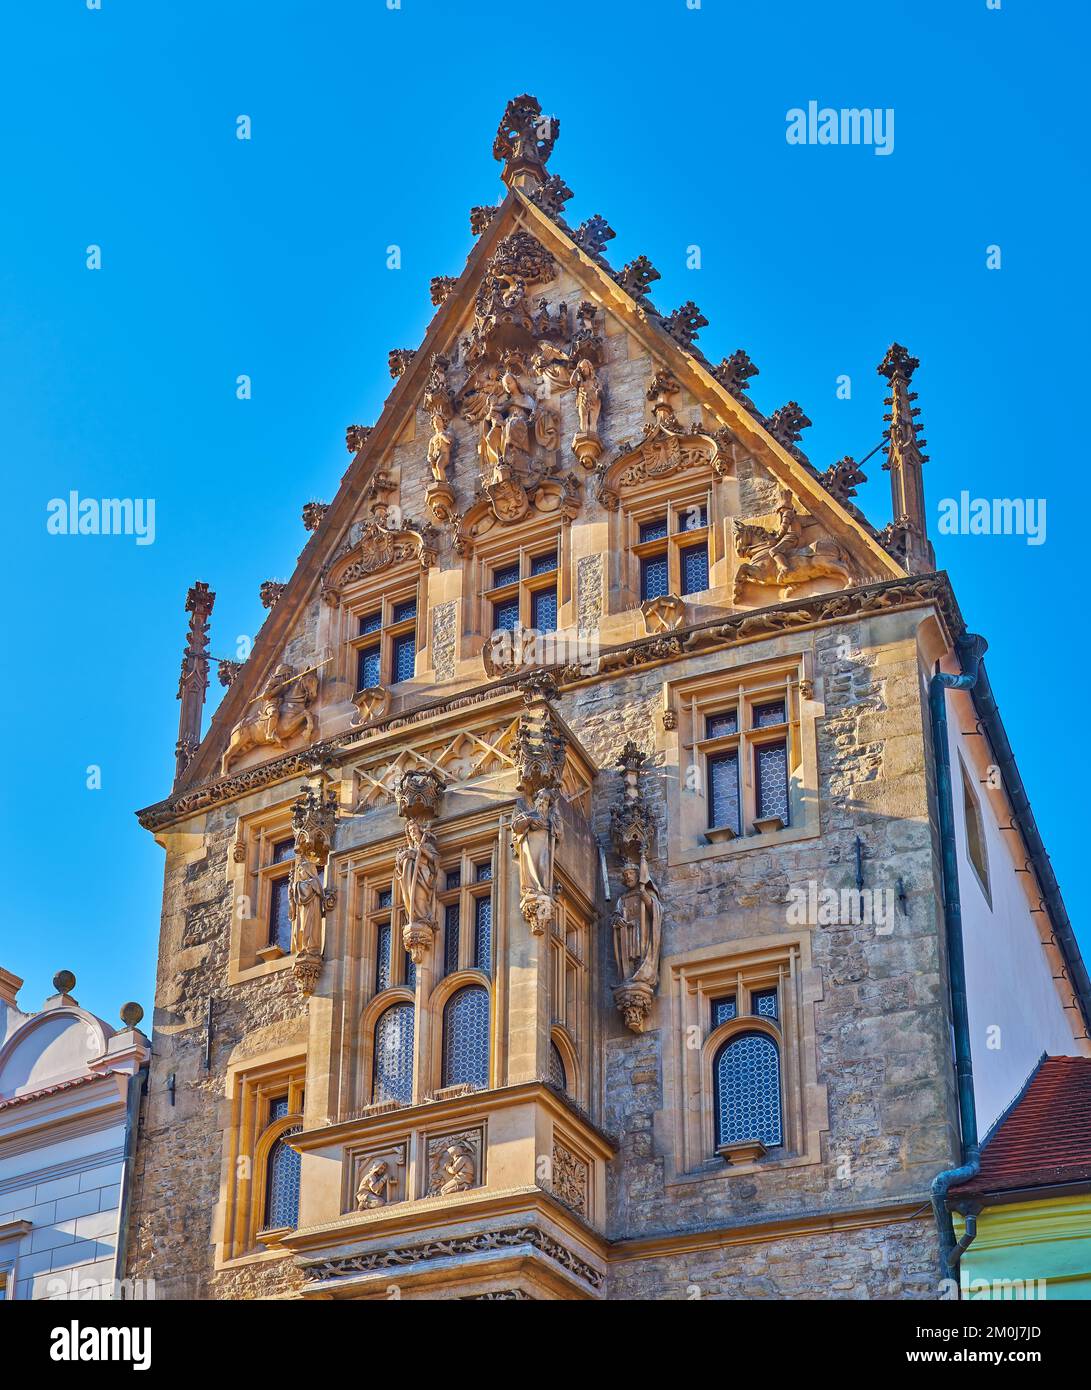 The Gothic gable roof of the medieval Stone House in old town of Kutna Hora, Czech Republic Stock Photo